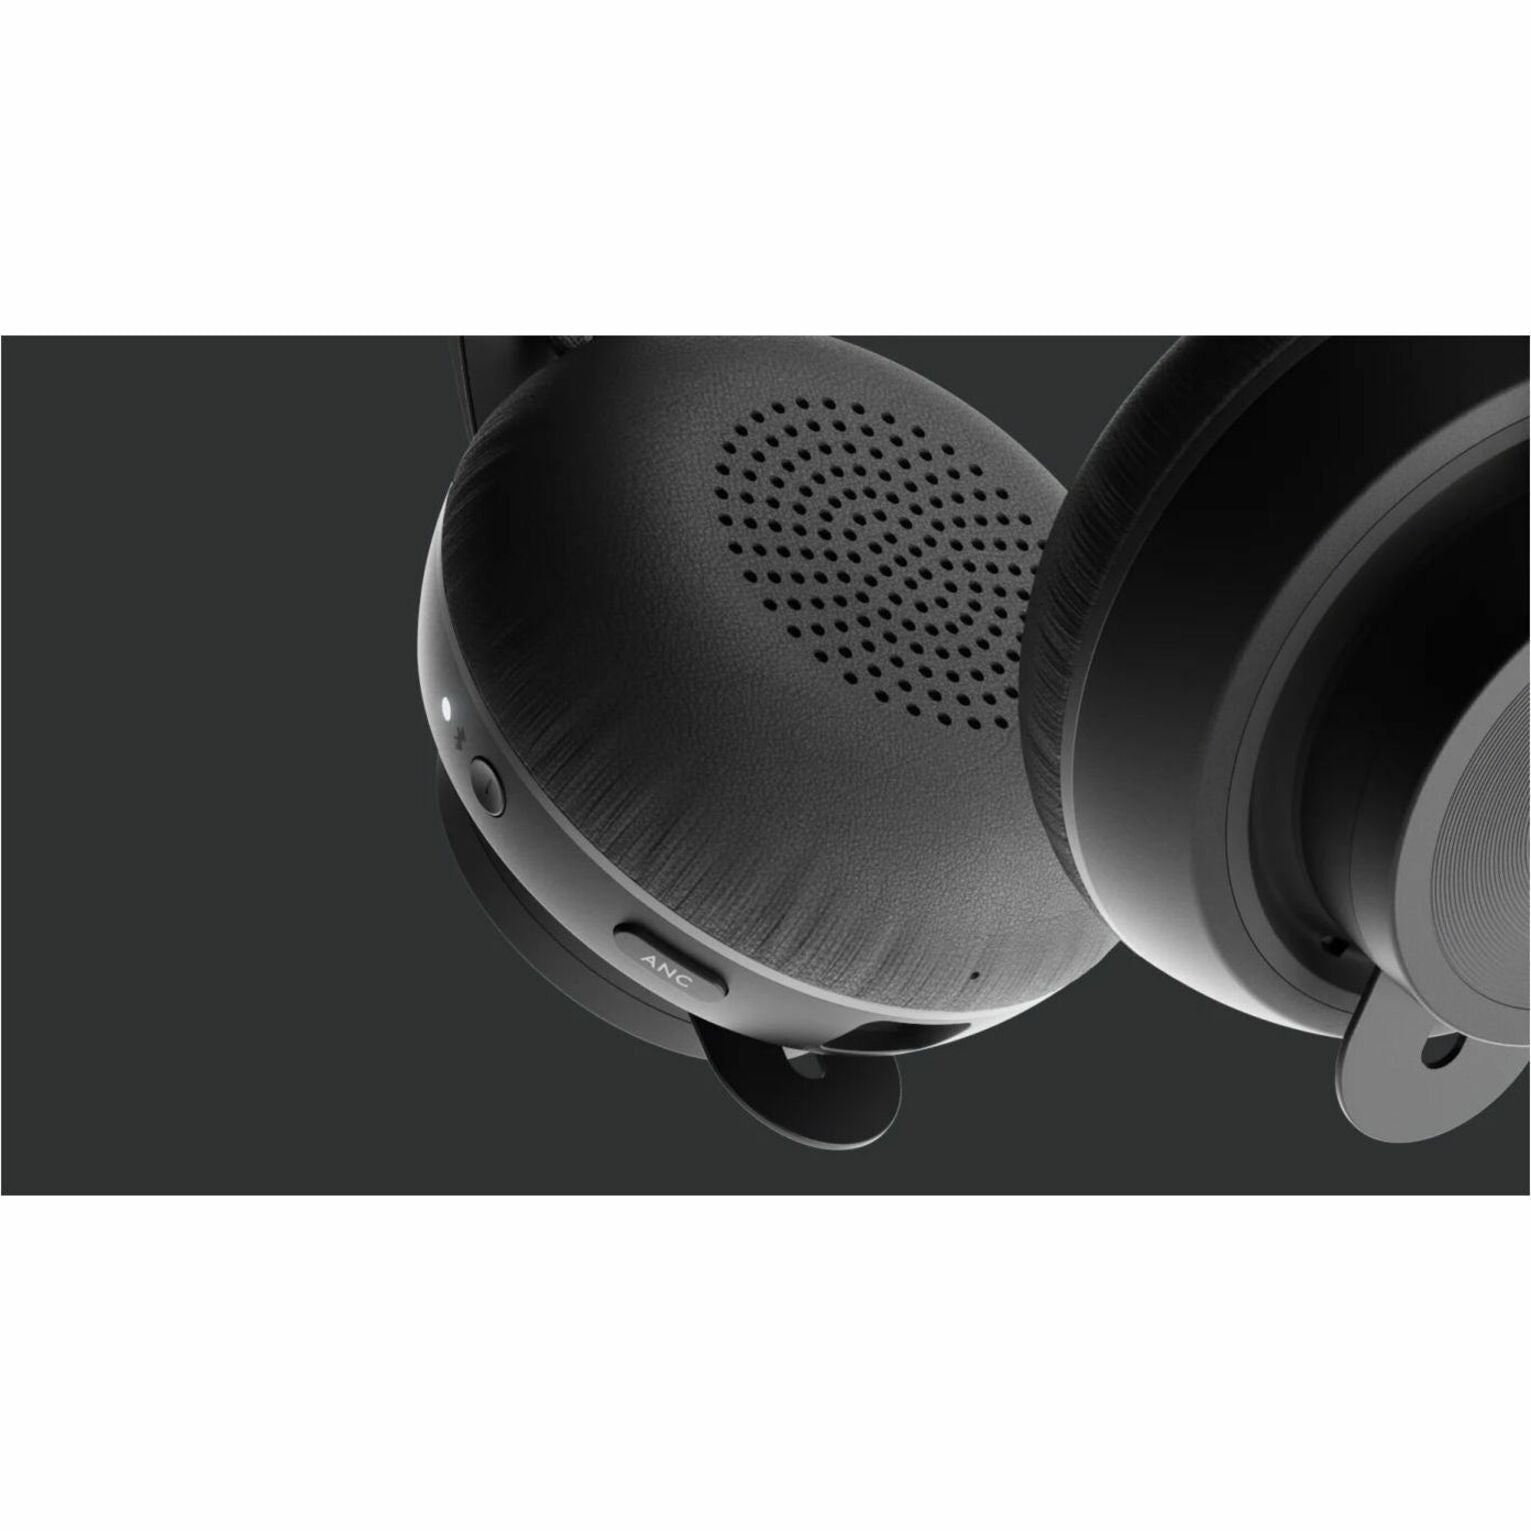 Logitech 989-000942 Zone Wireless and Wireless Plus Replacement Earpad Covers, 2 Year Limited Warranty